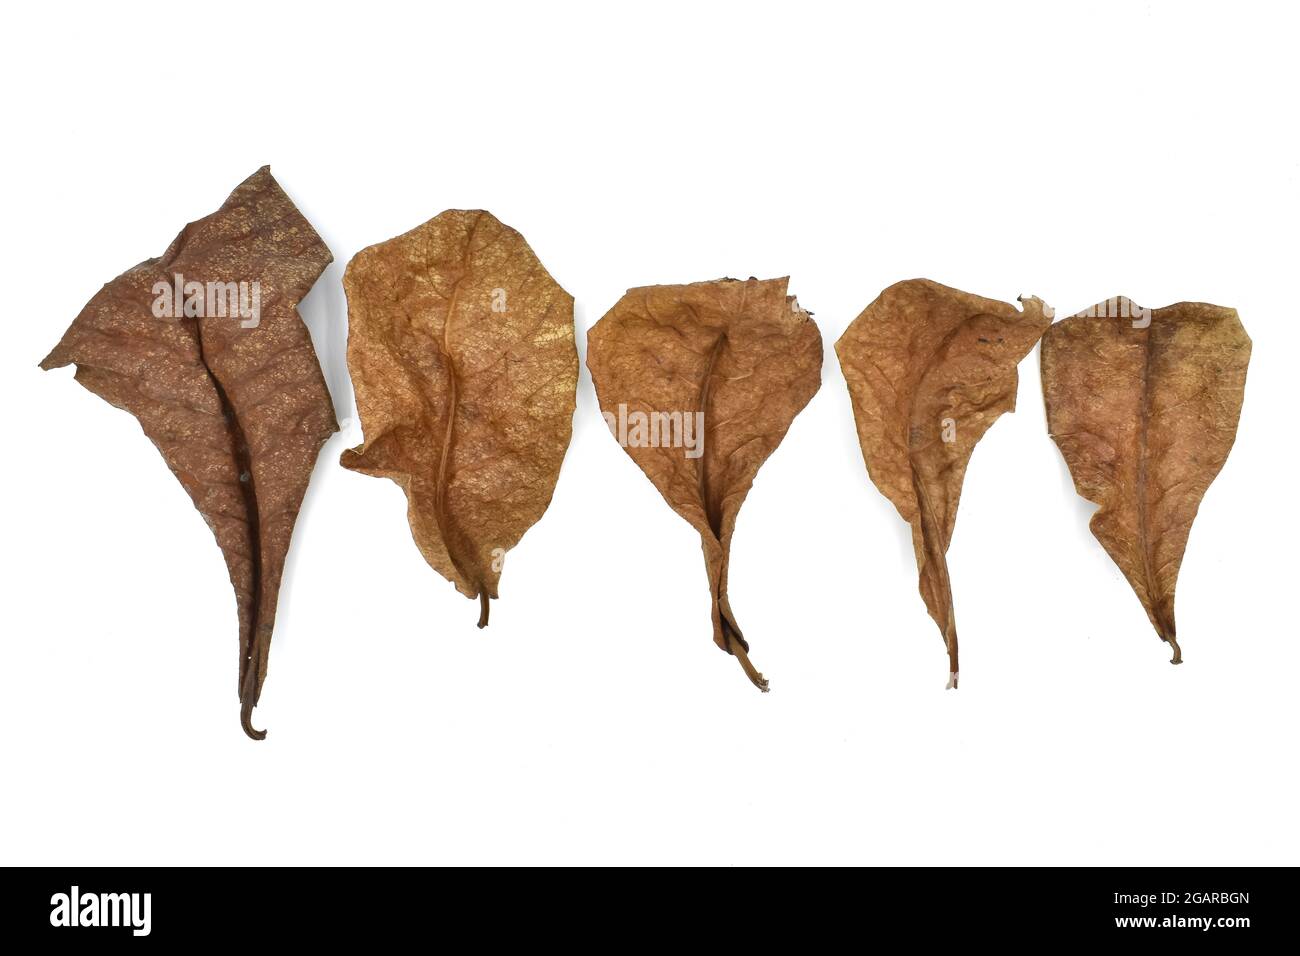 Five dry indian almond leaves isolated on white background. Stock Photo